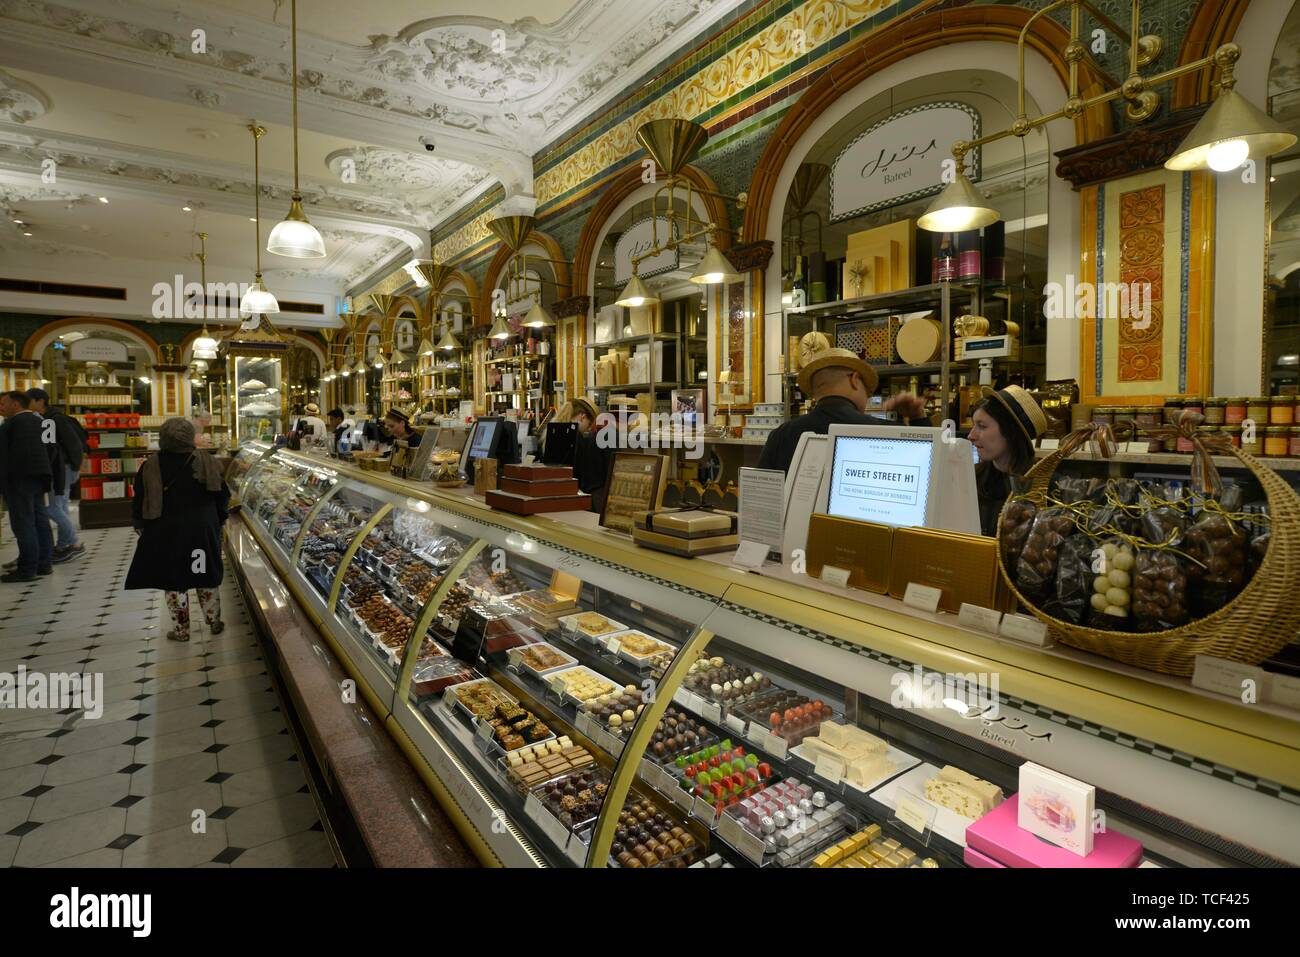 Bar with chocolates, chocolate department, Harrods department store, London, England, Great Britain Stock Photo